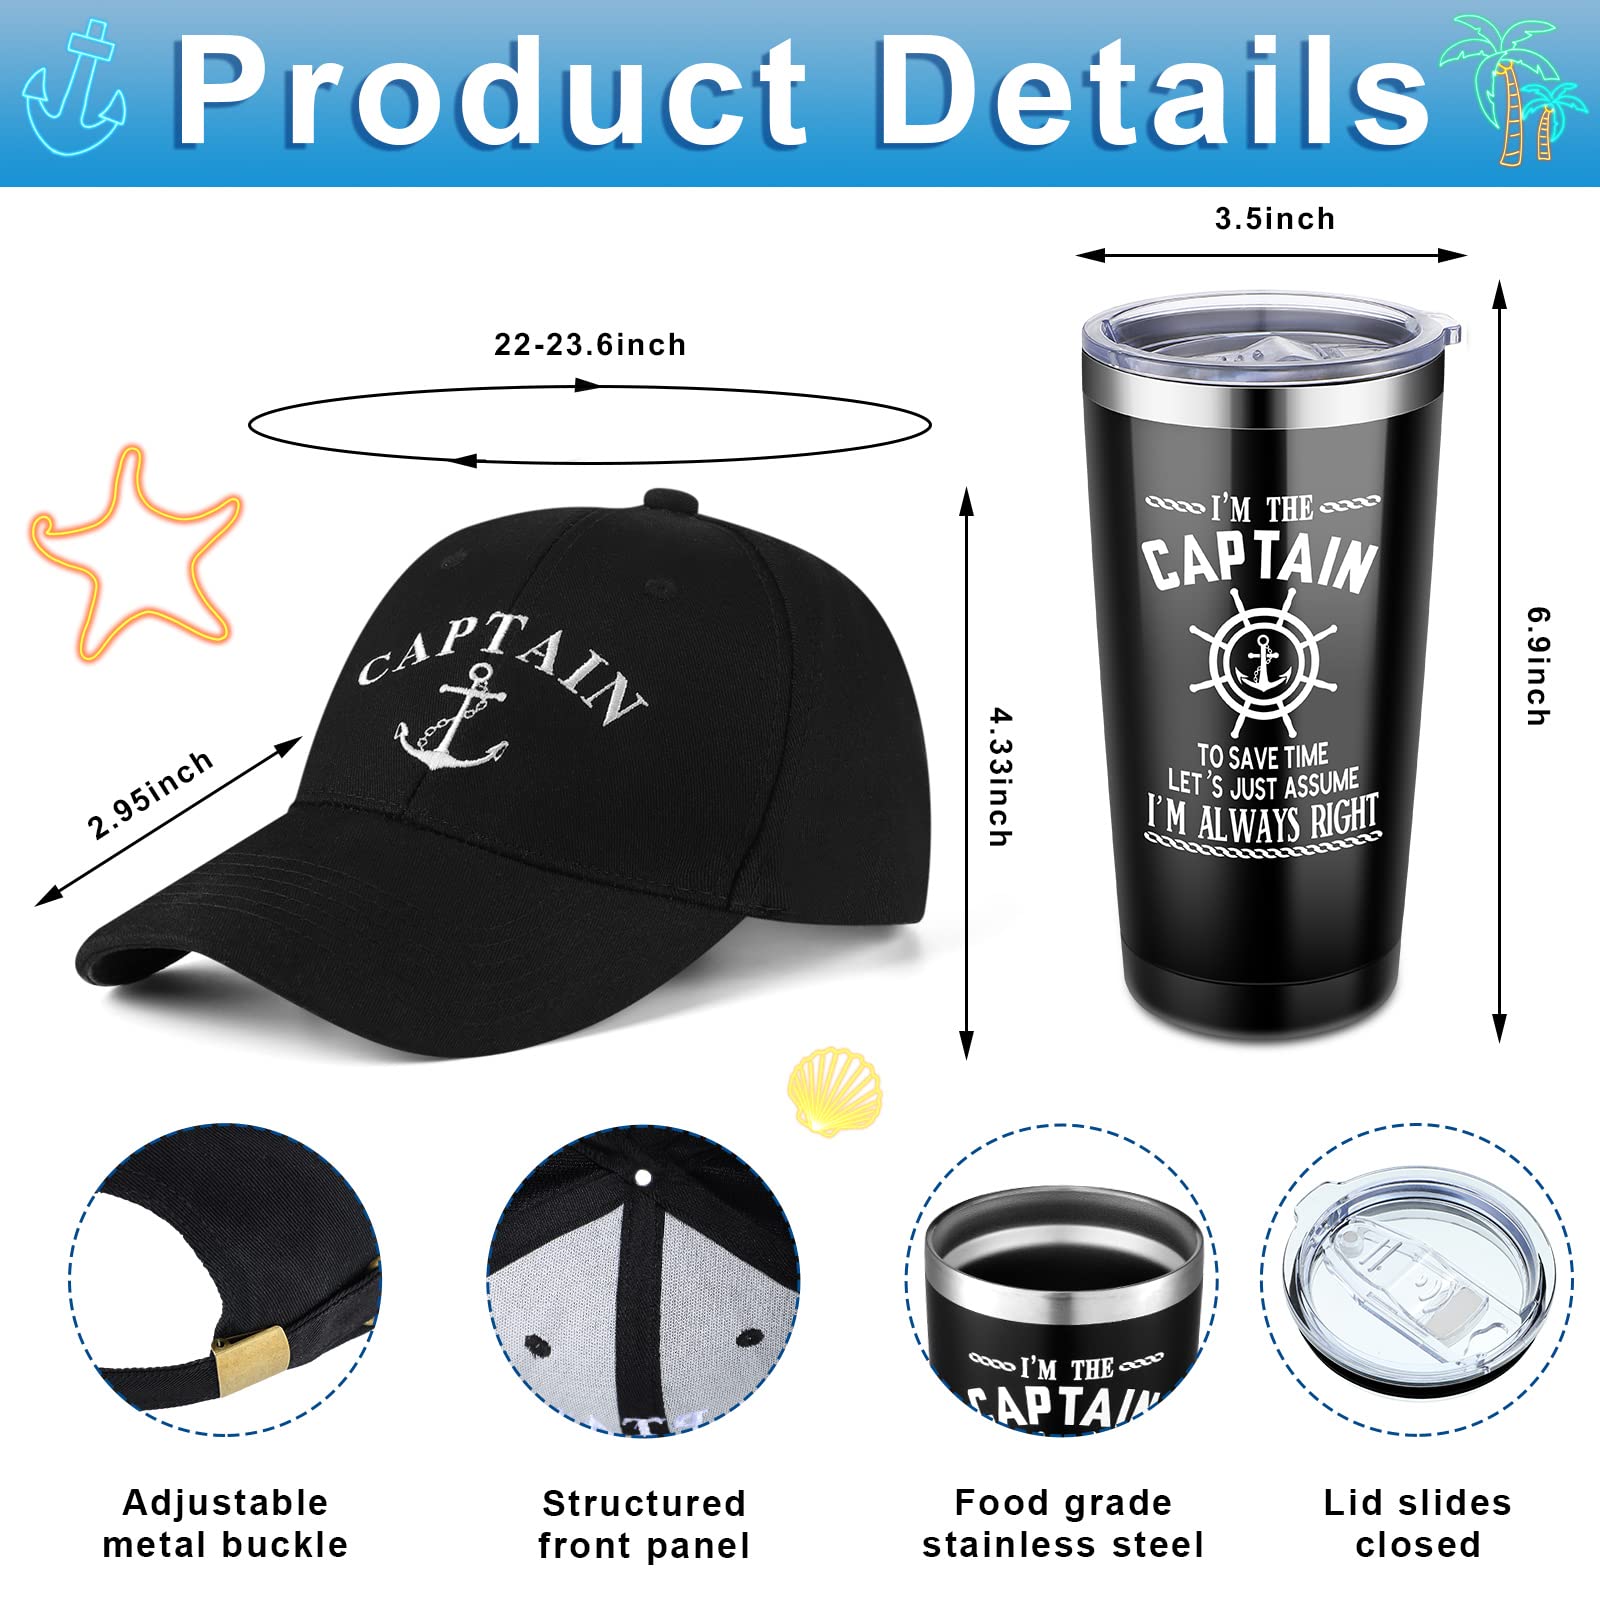 Handepo Boating Accessories Gifts for Men Boat Captain Cap I'm Captain Tumbler Boating Baseball Cap Nautical Cups Stainless Steel Coffee Mug Summer Gifts (Black)